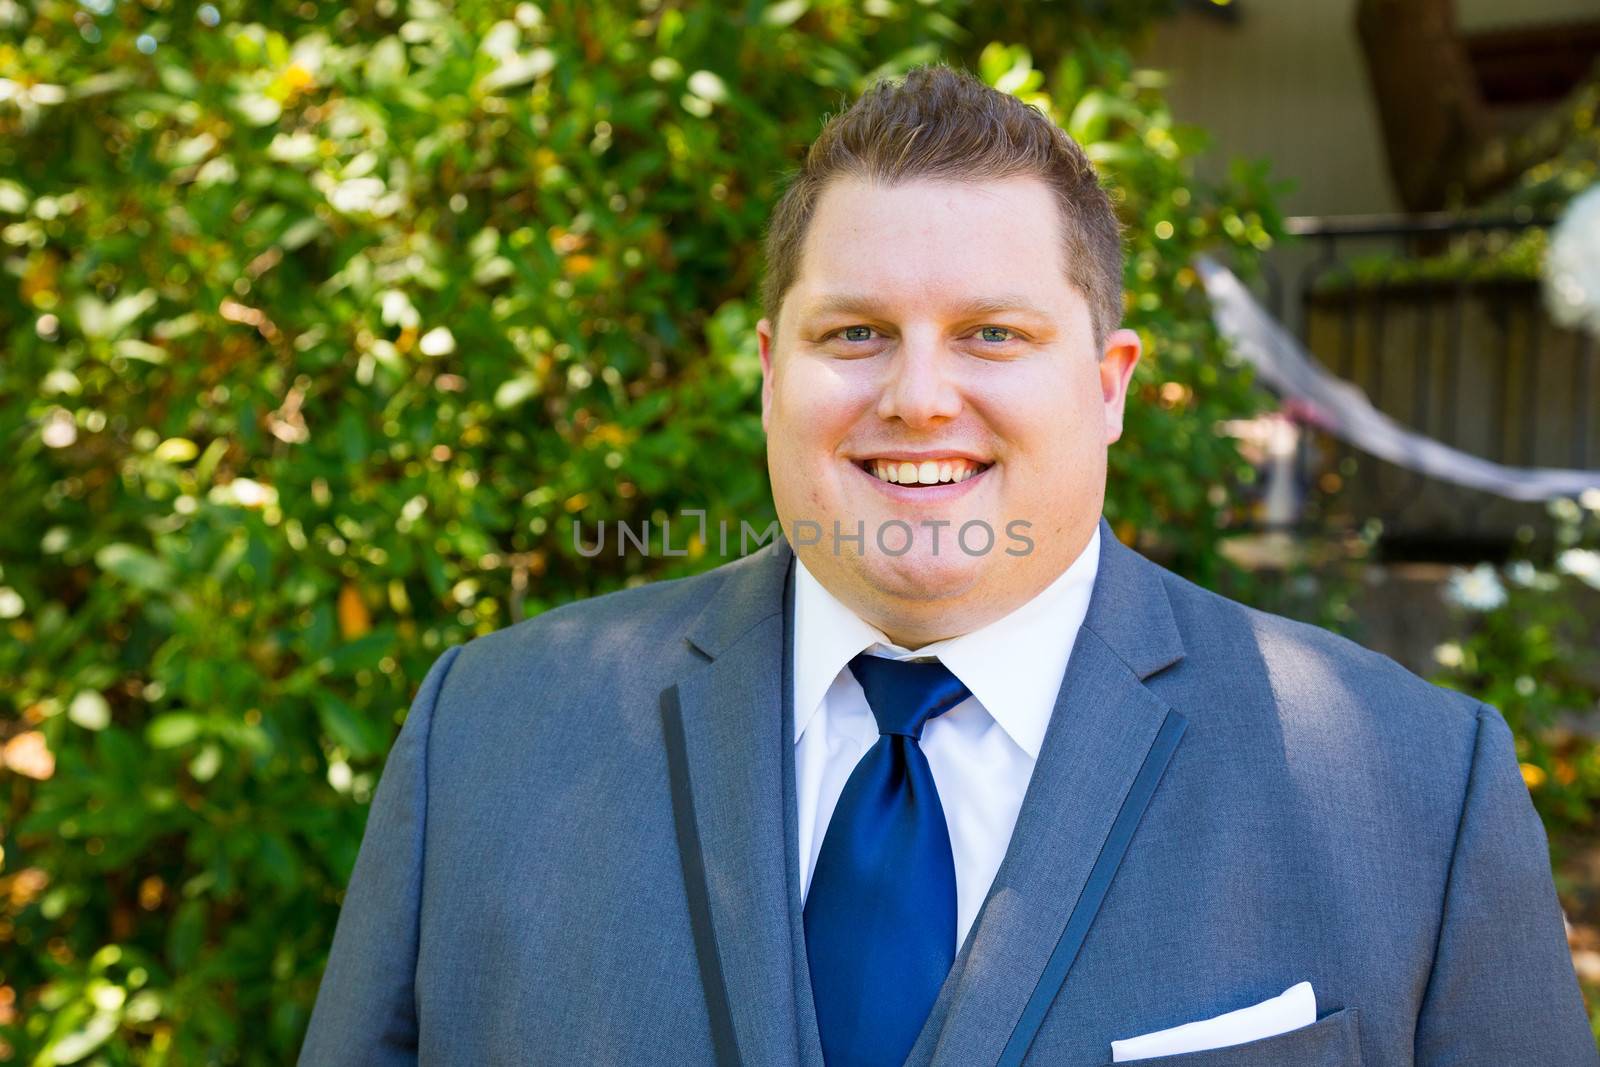 Portraits of a groom on his wedding day while waiting for his bride at a park outdoors in Oregon before the ceremony.